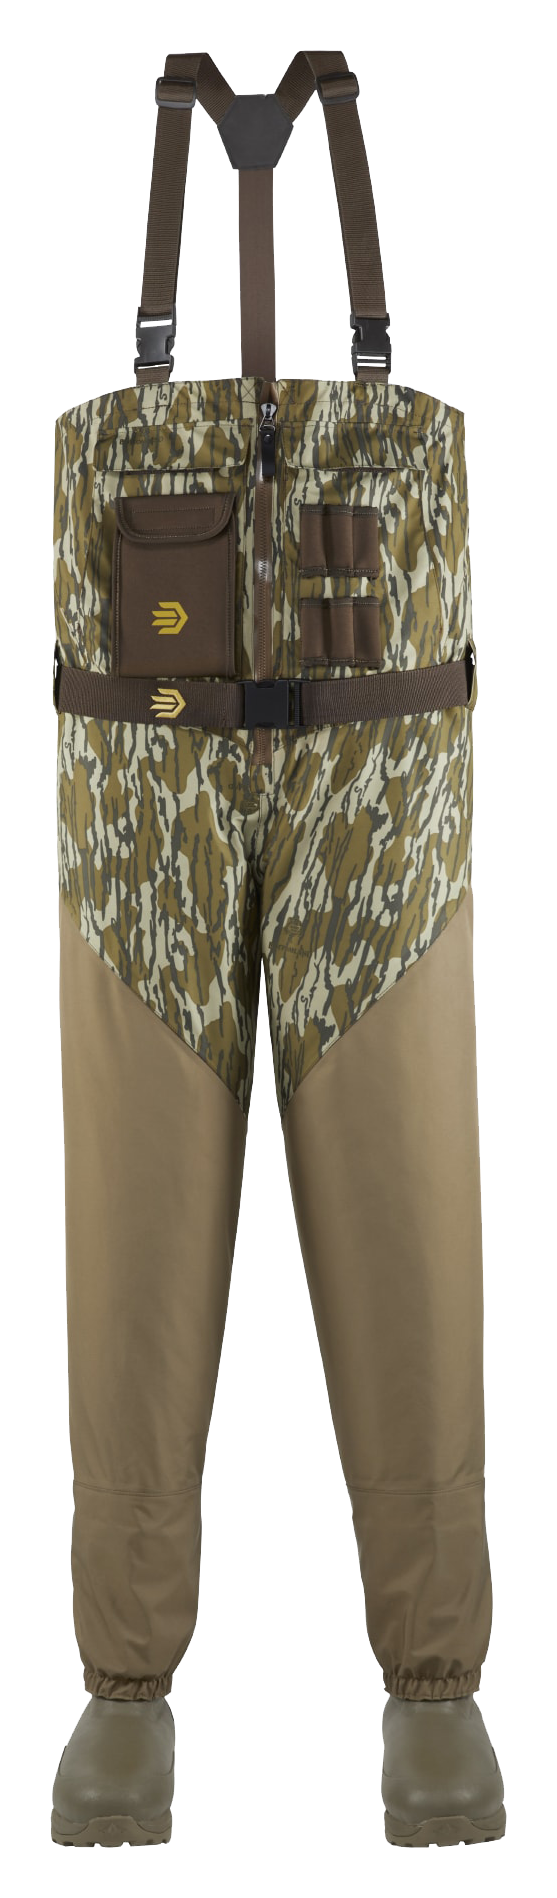 LaCrosse Alpha Agility Select Insulated Front-Zip Breathable Hunting Waders for Men - Mossy Oak Original Bottomland - 13/Medium